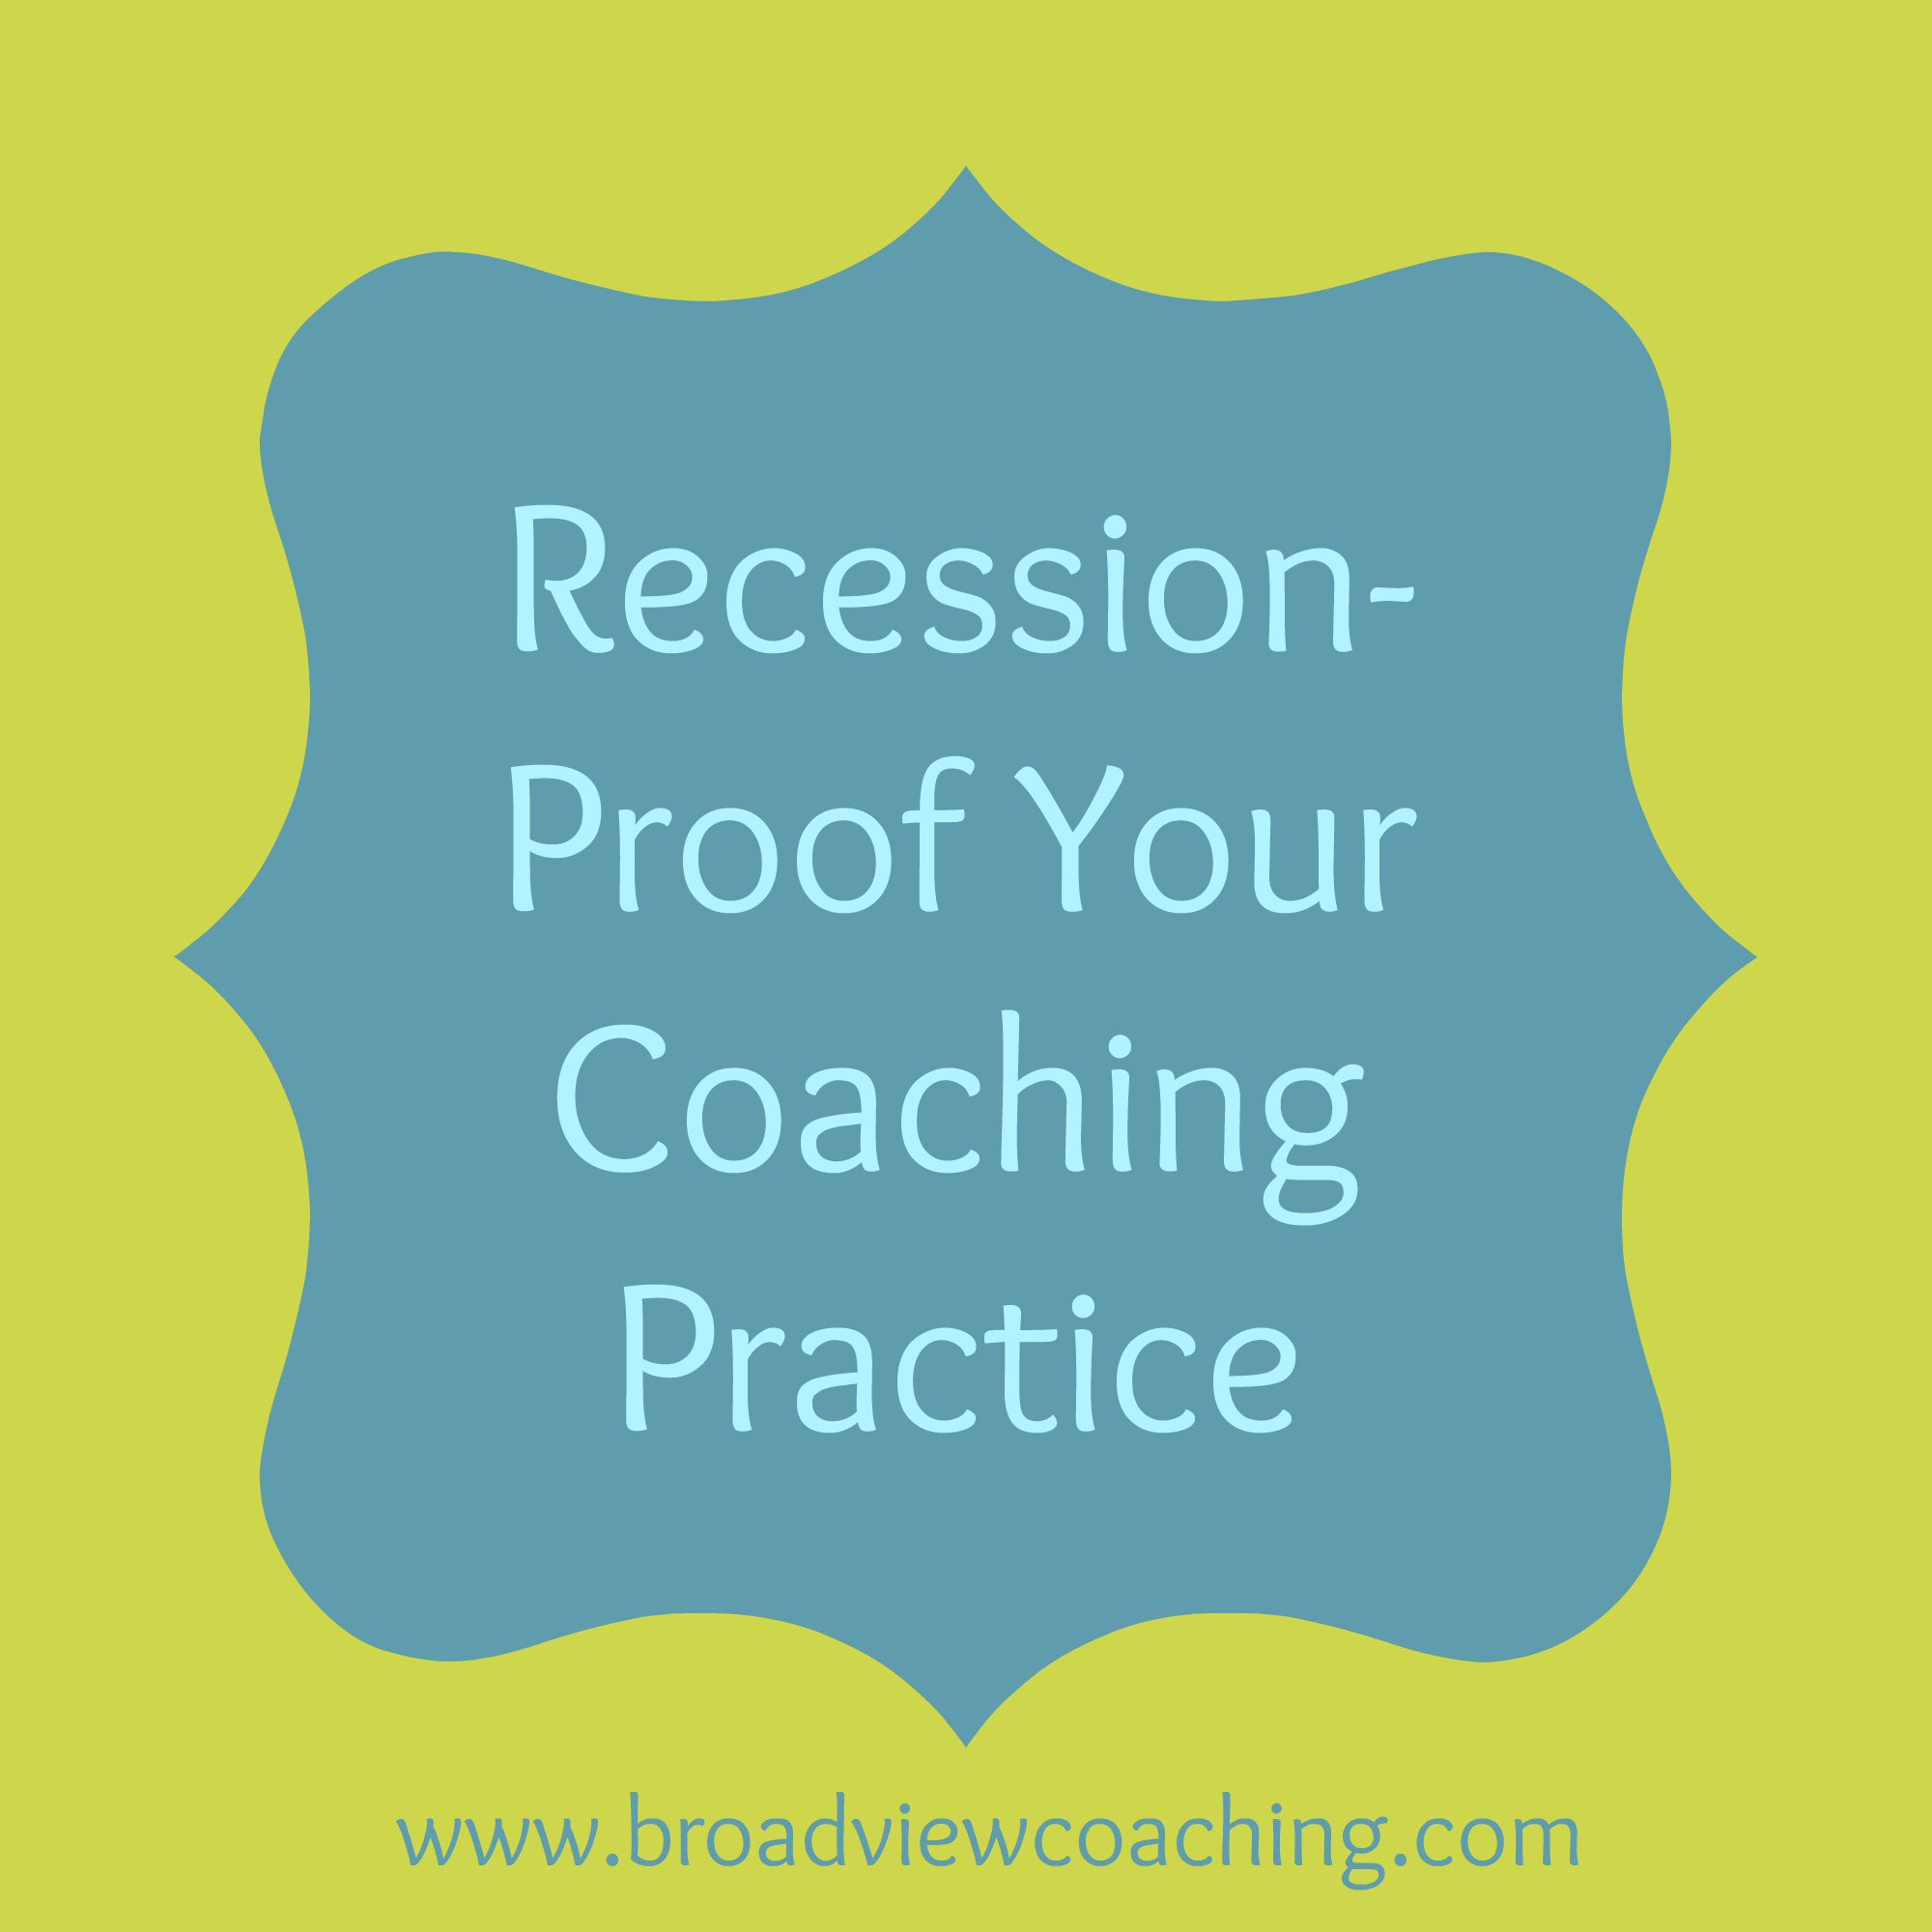 Recession-proof your coaching practice